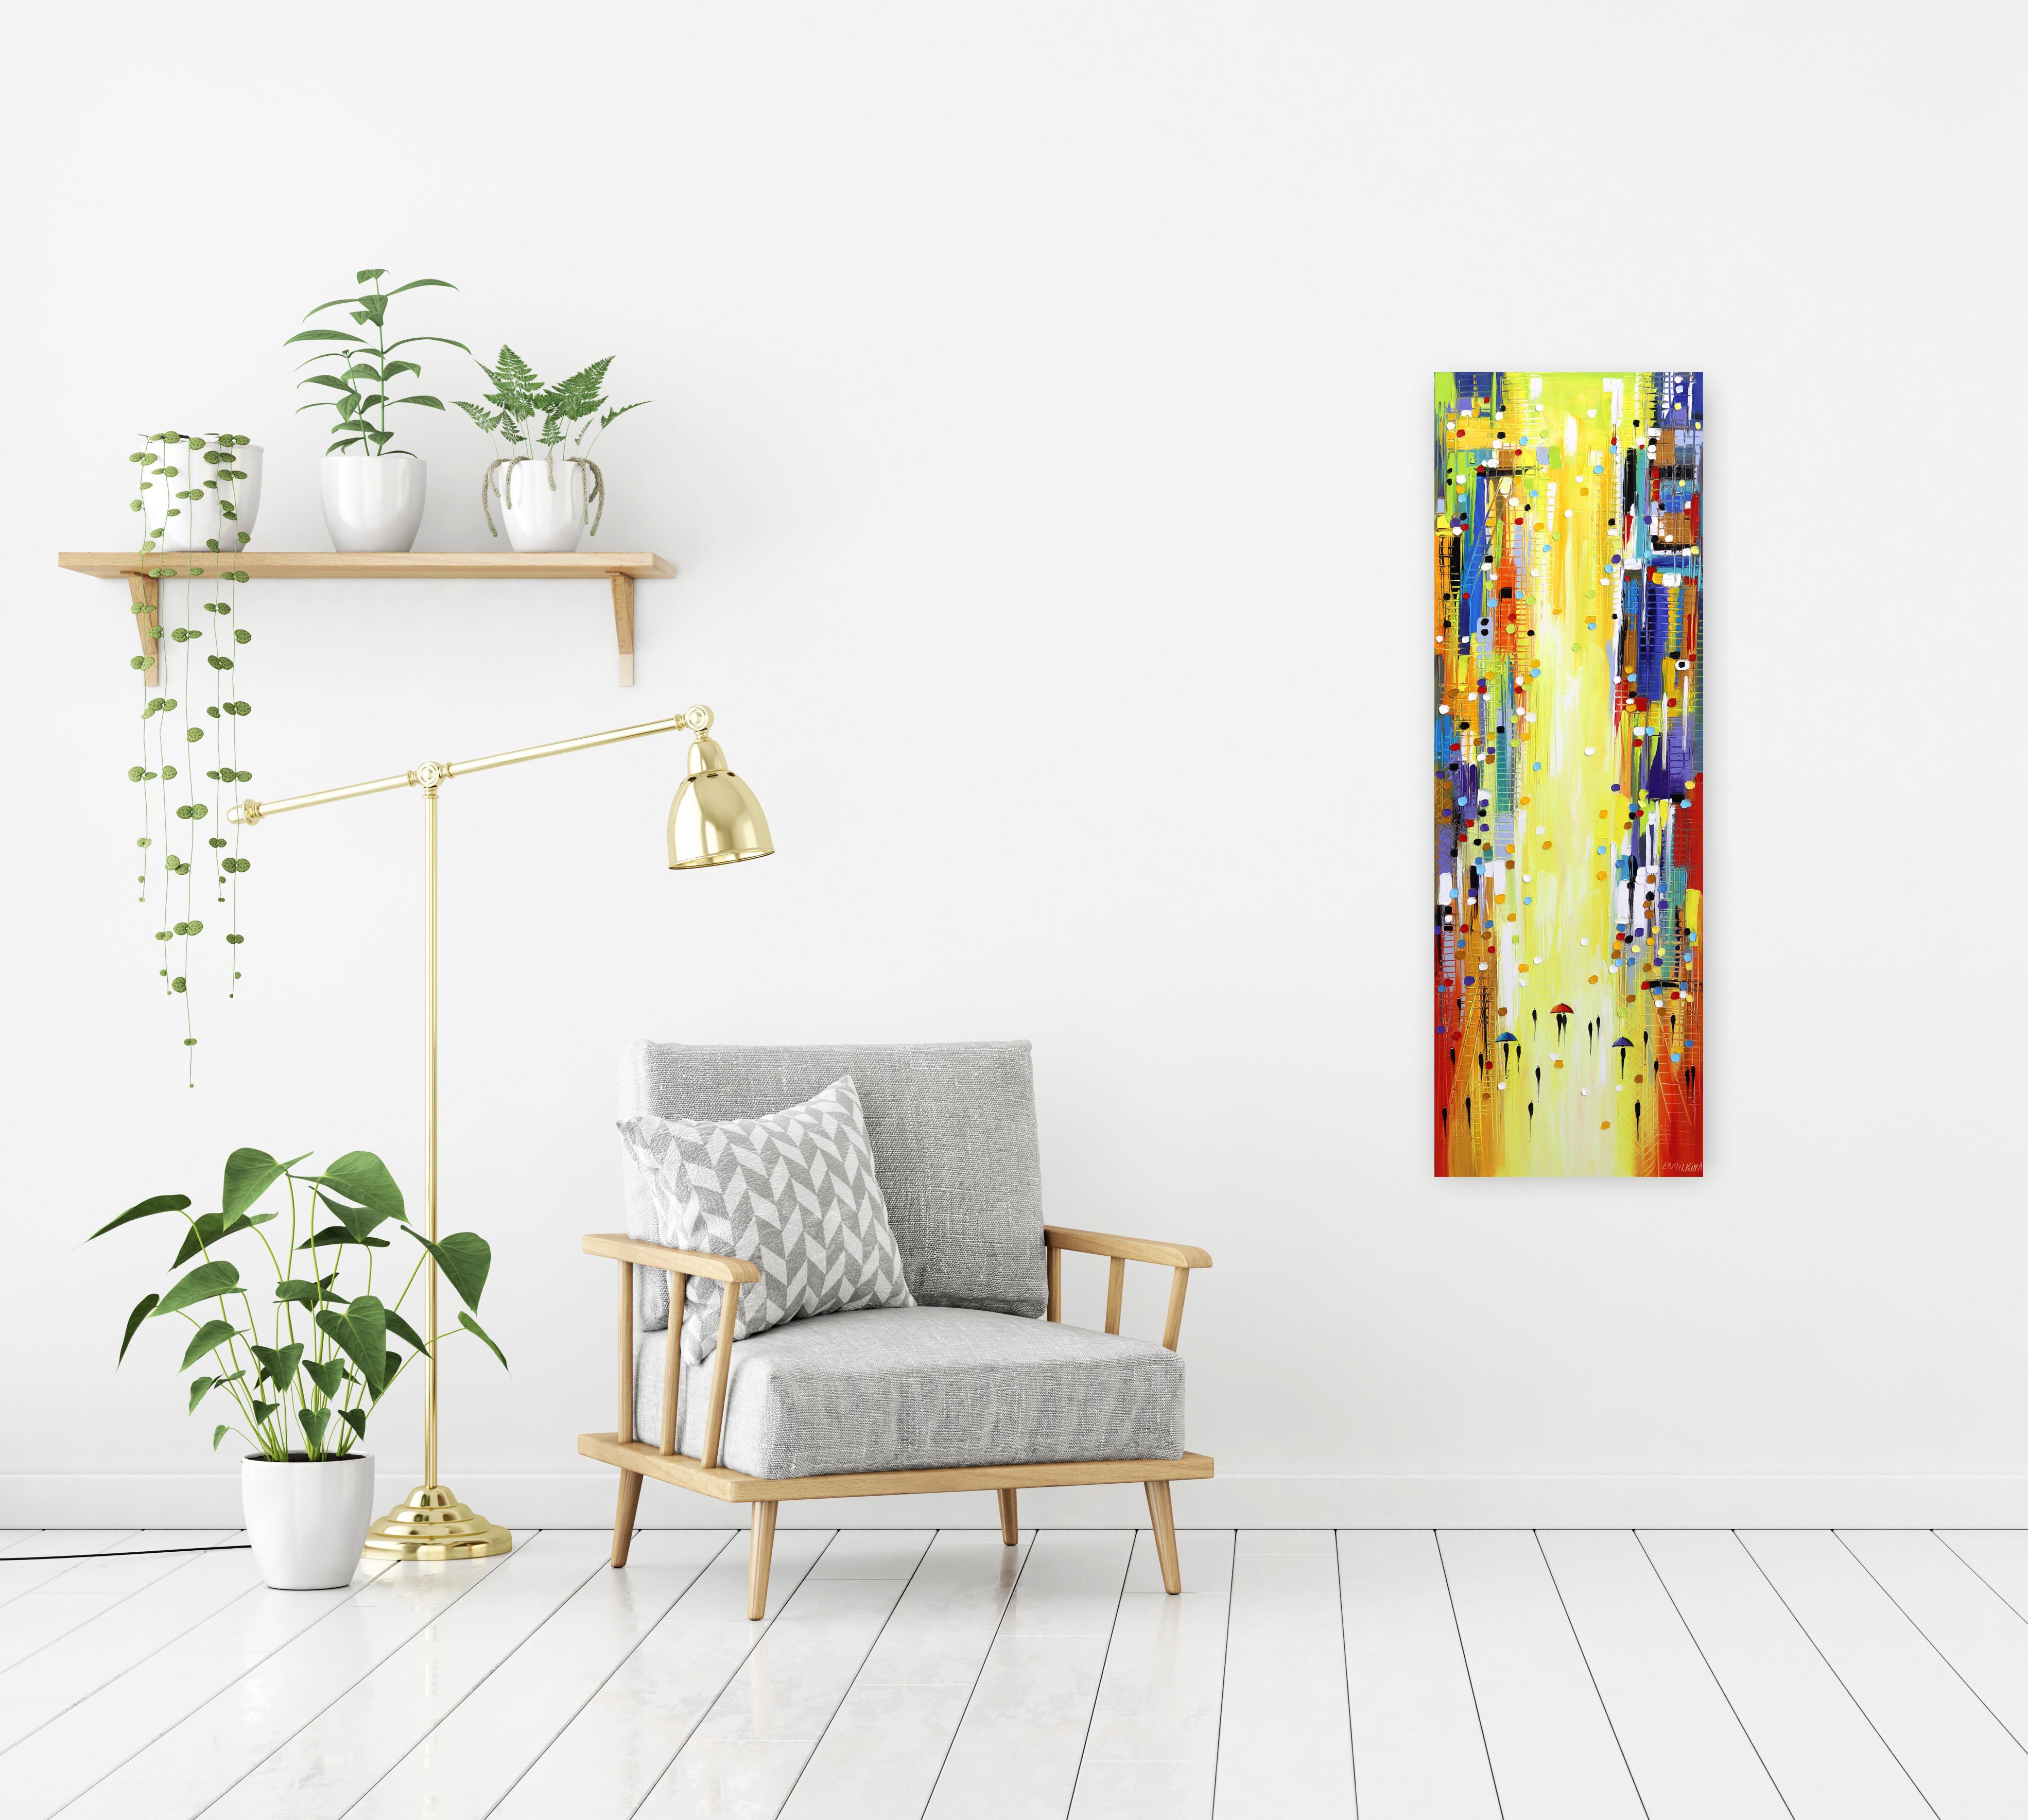 Ekaterina Ermilkina’s original, abstract fine art paintings are created using a skillful combination of applying and removing oil paint with a palette knife on canvas. Her inspirations are the expressionistic skylines of big cities like Manhattan,